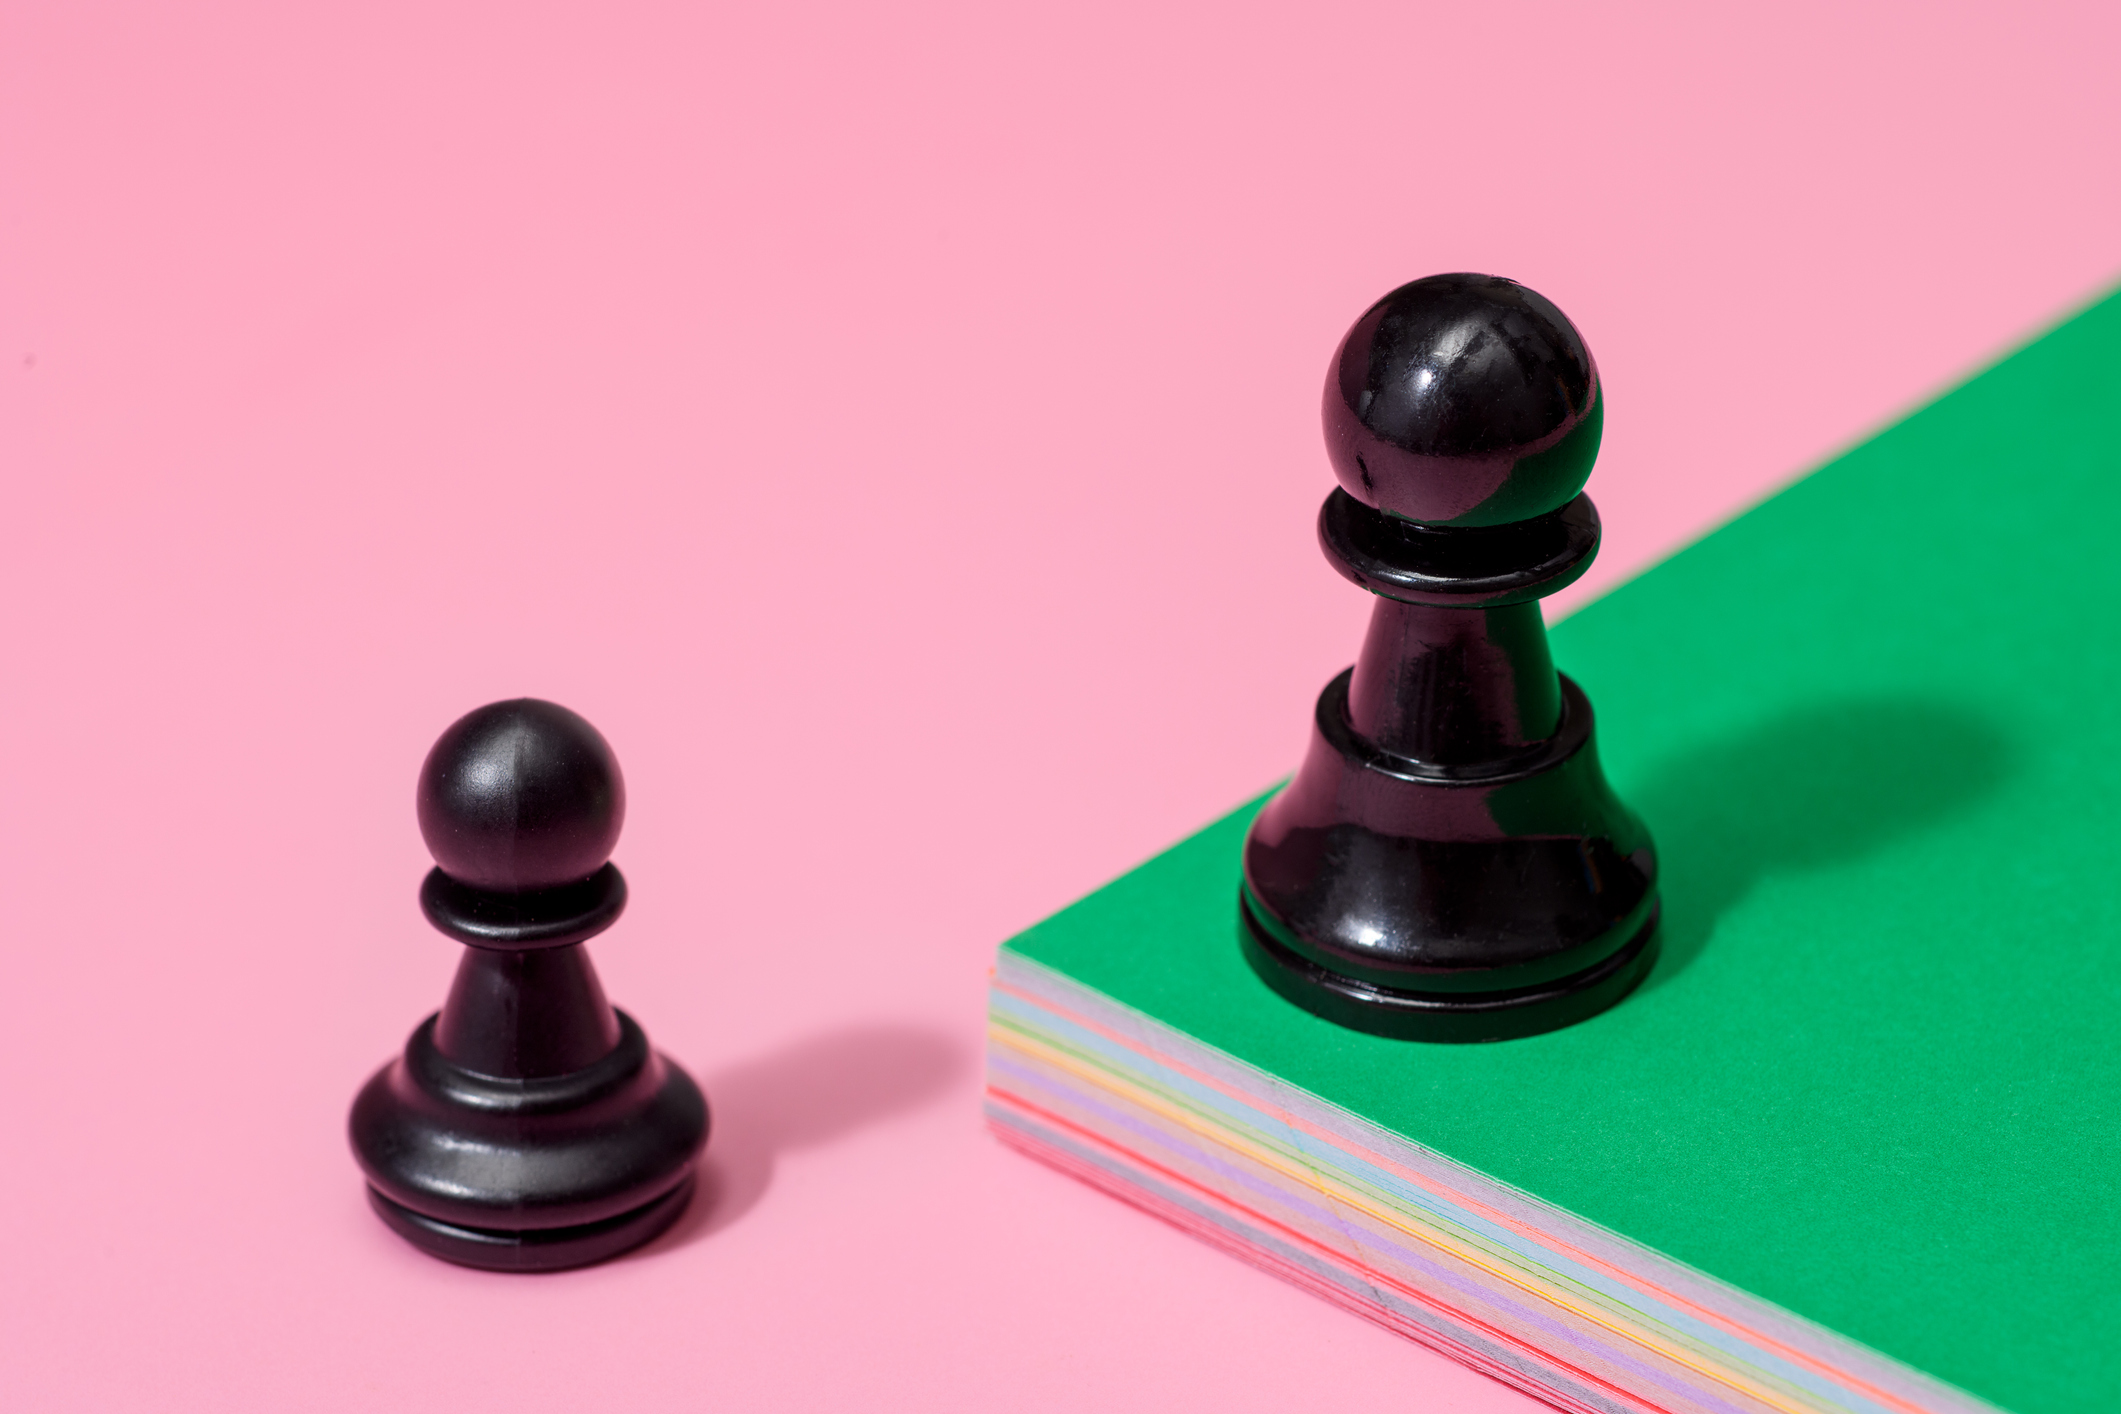 a chess pawn on a green raised platform, with one on a lower pink platform.  startups and market declines